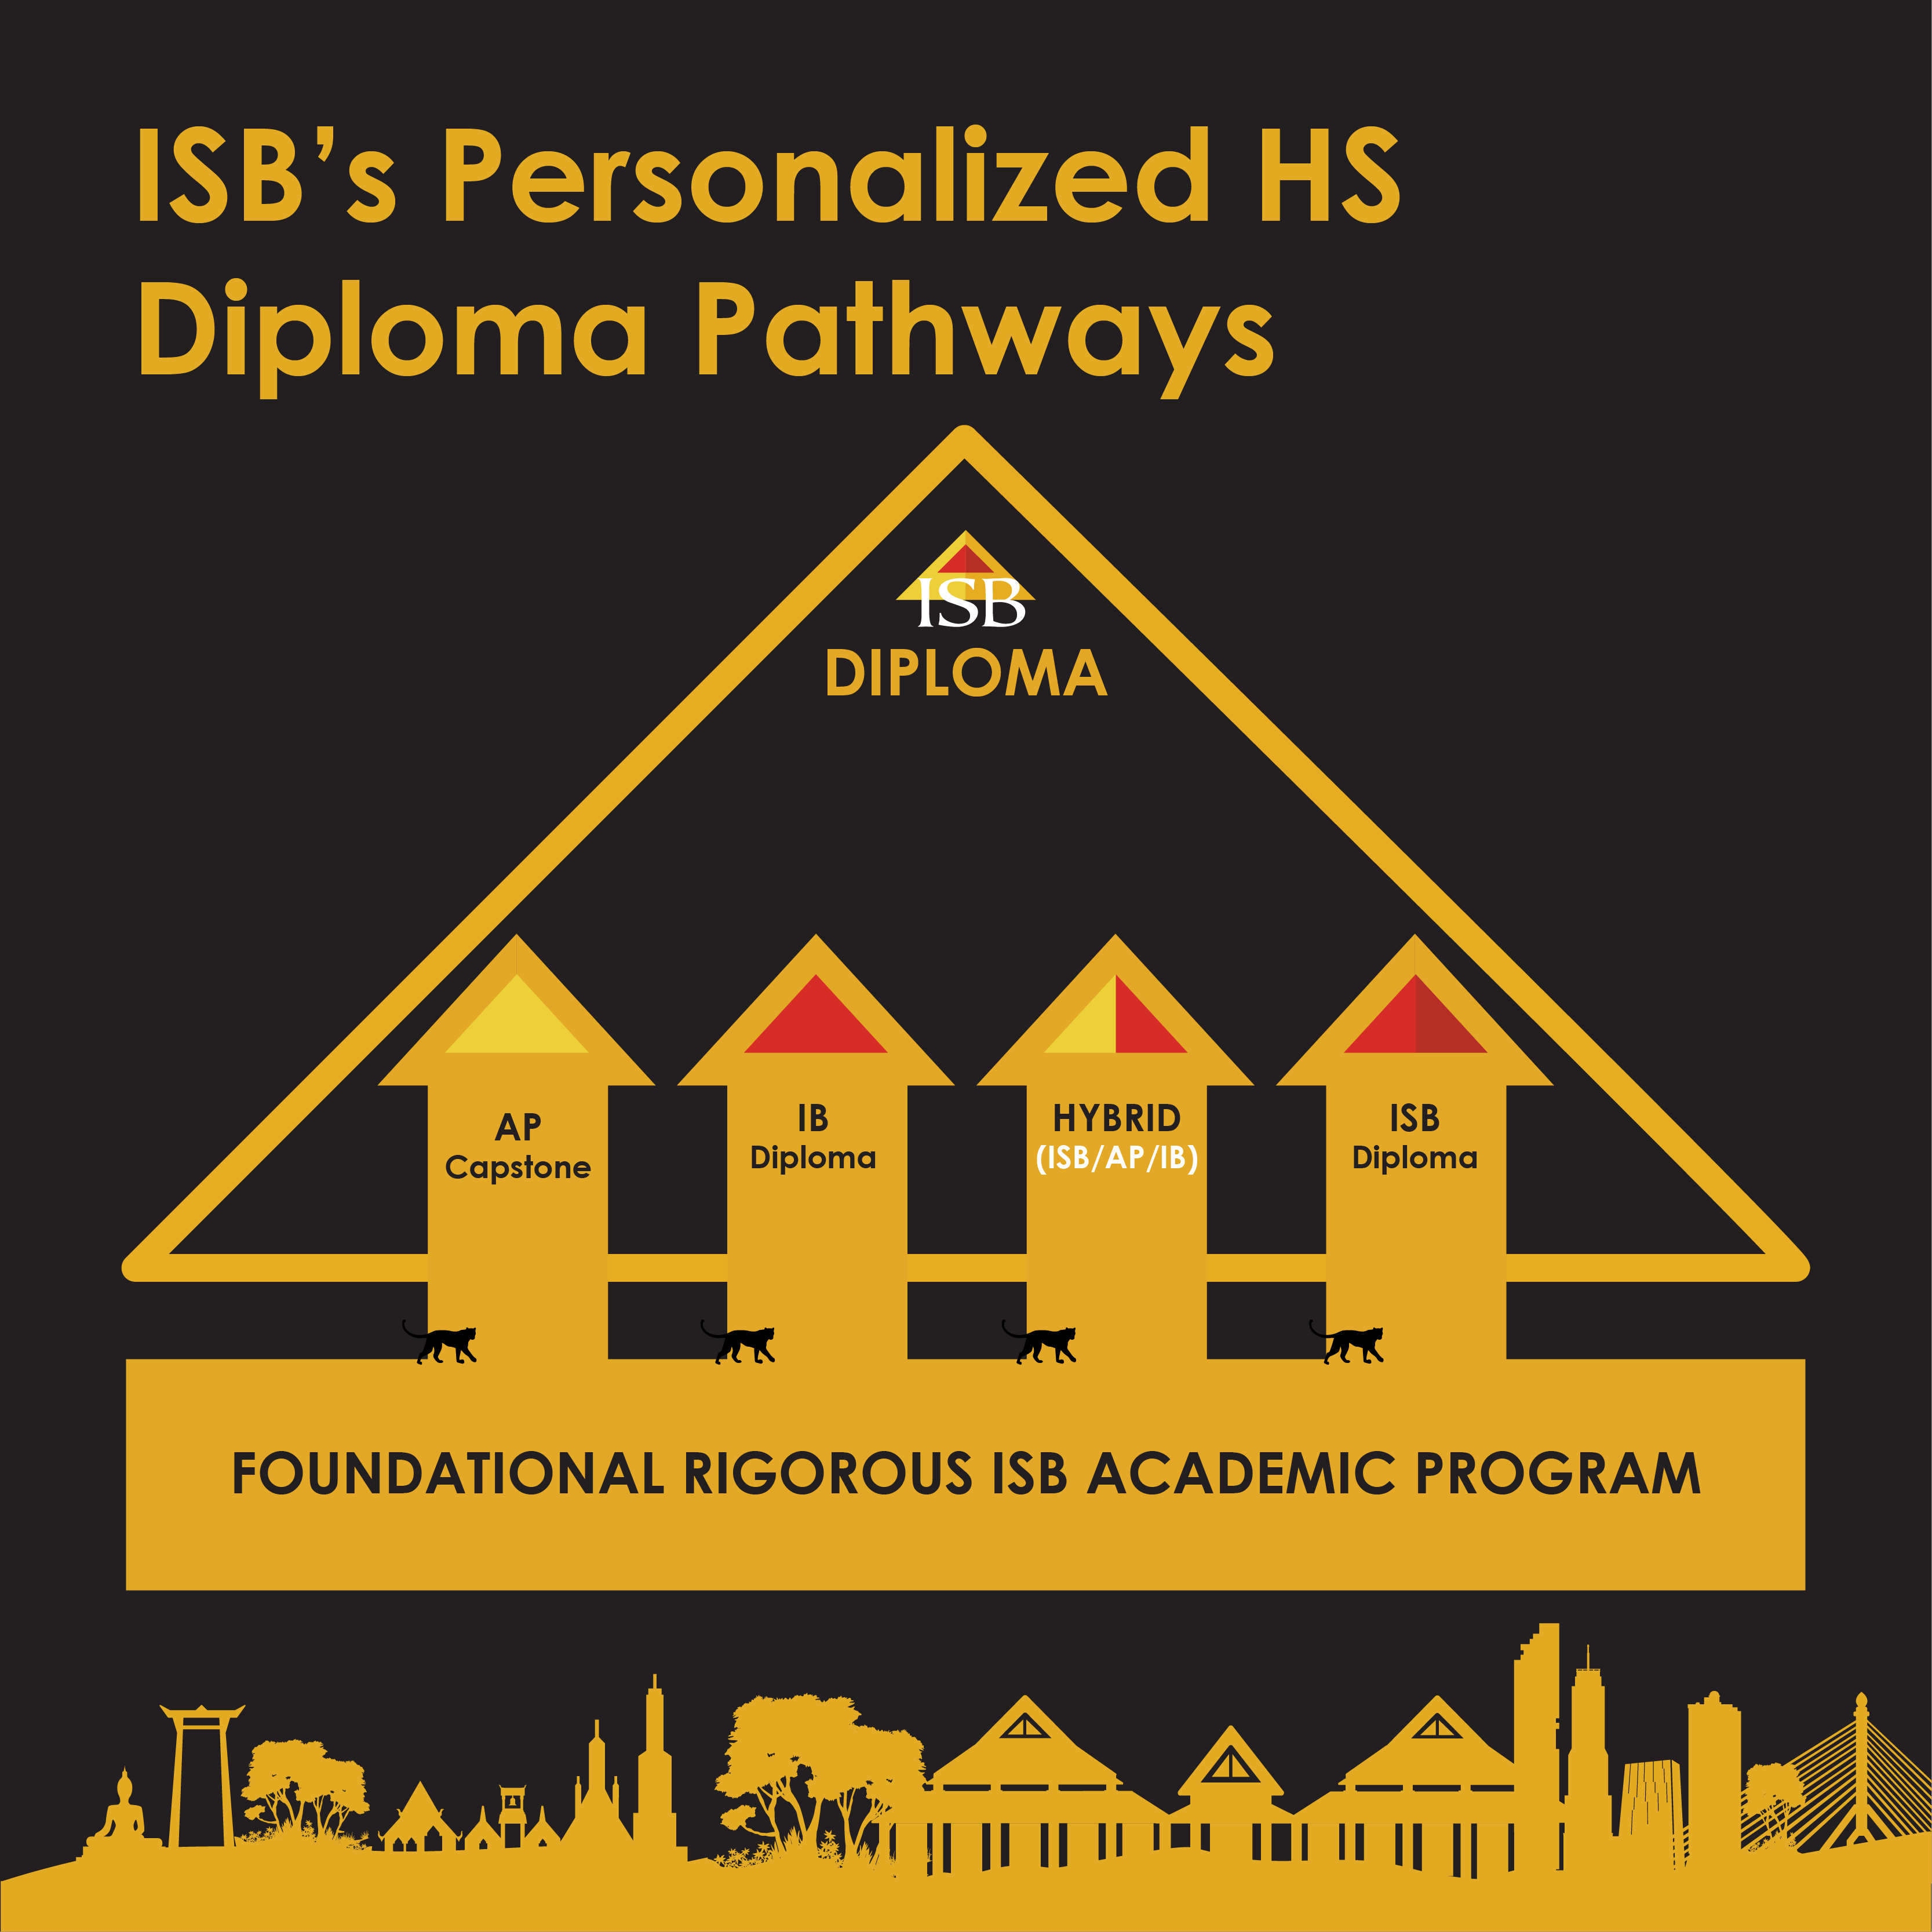 1. Personalized HS Diploma Pathways